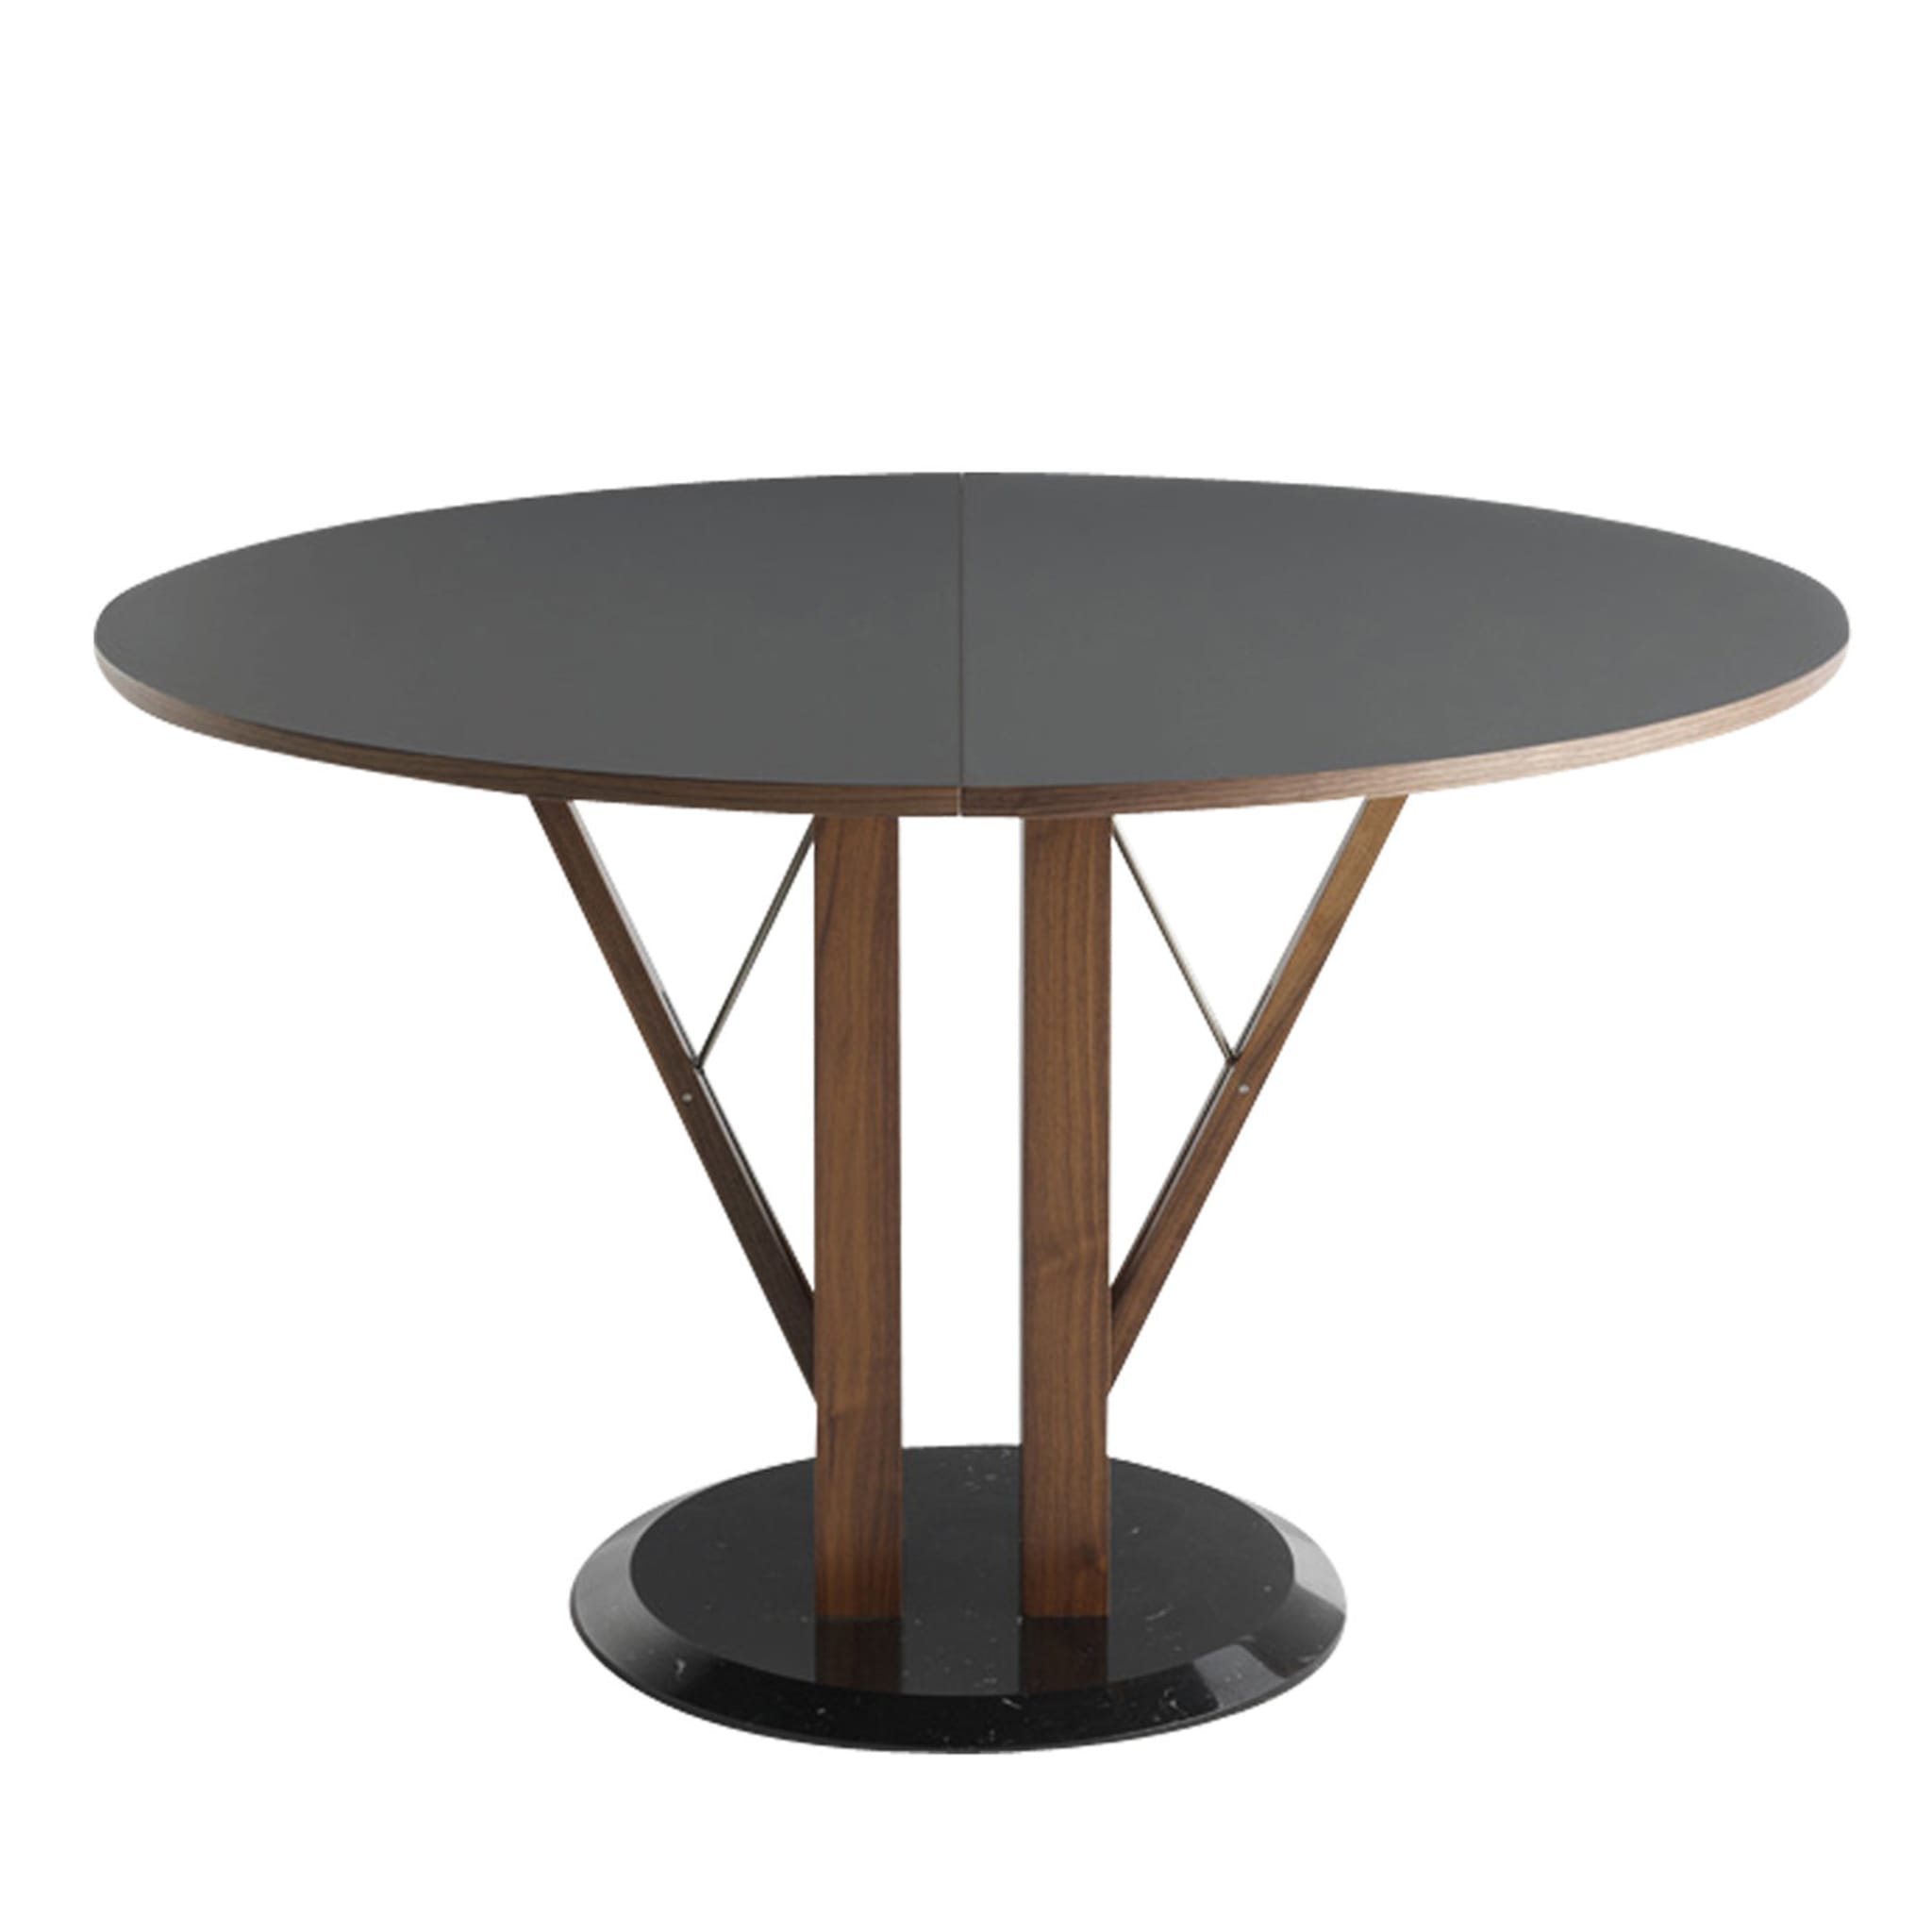 Flower Extendable Table by D'urbino Lomazzi - Main view